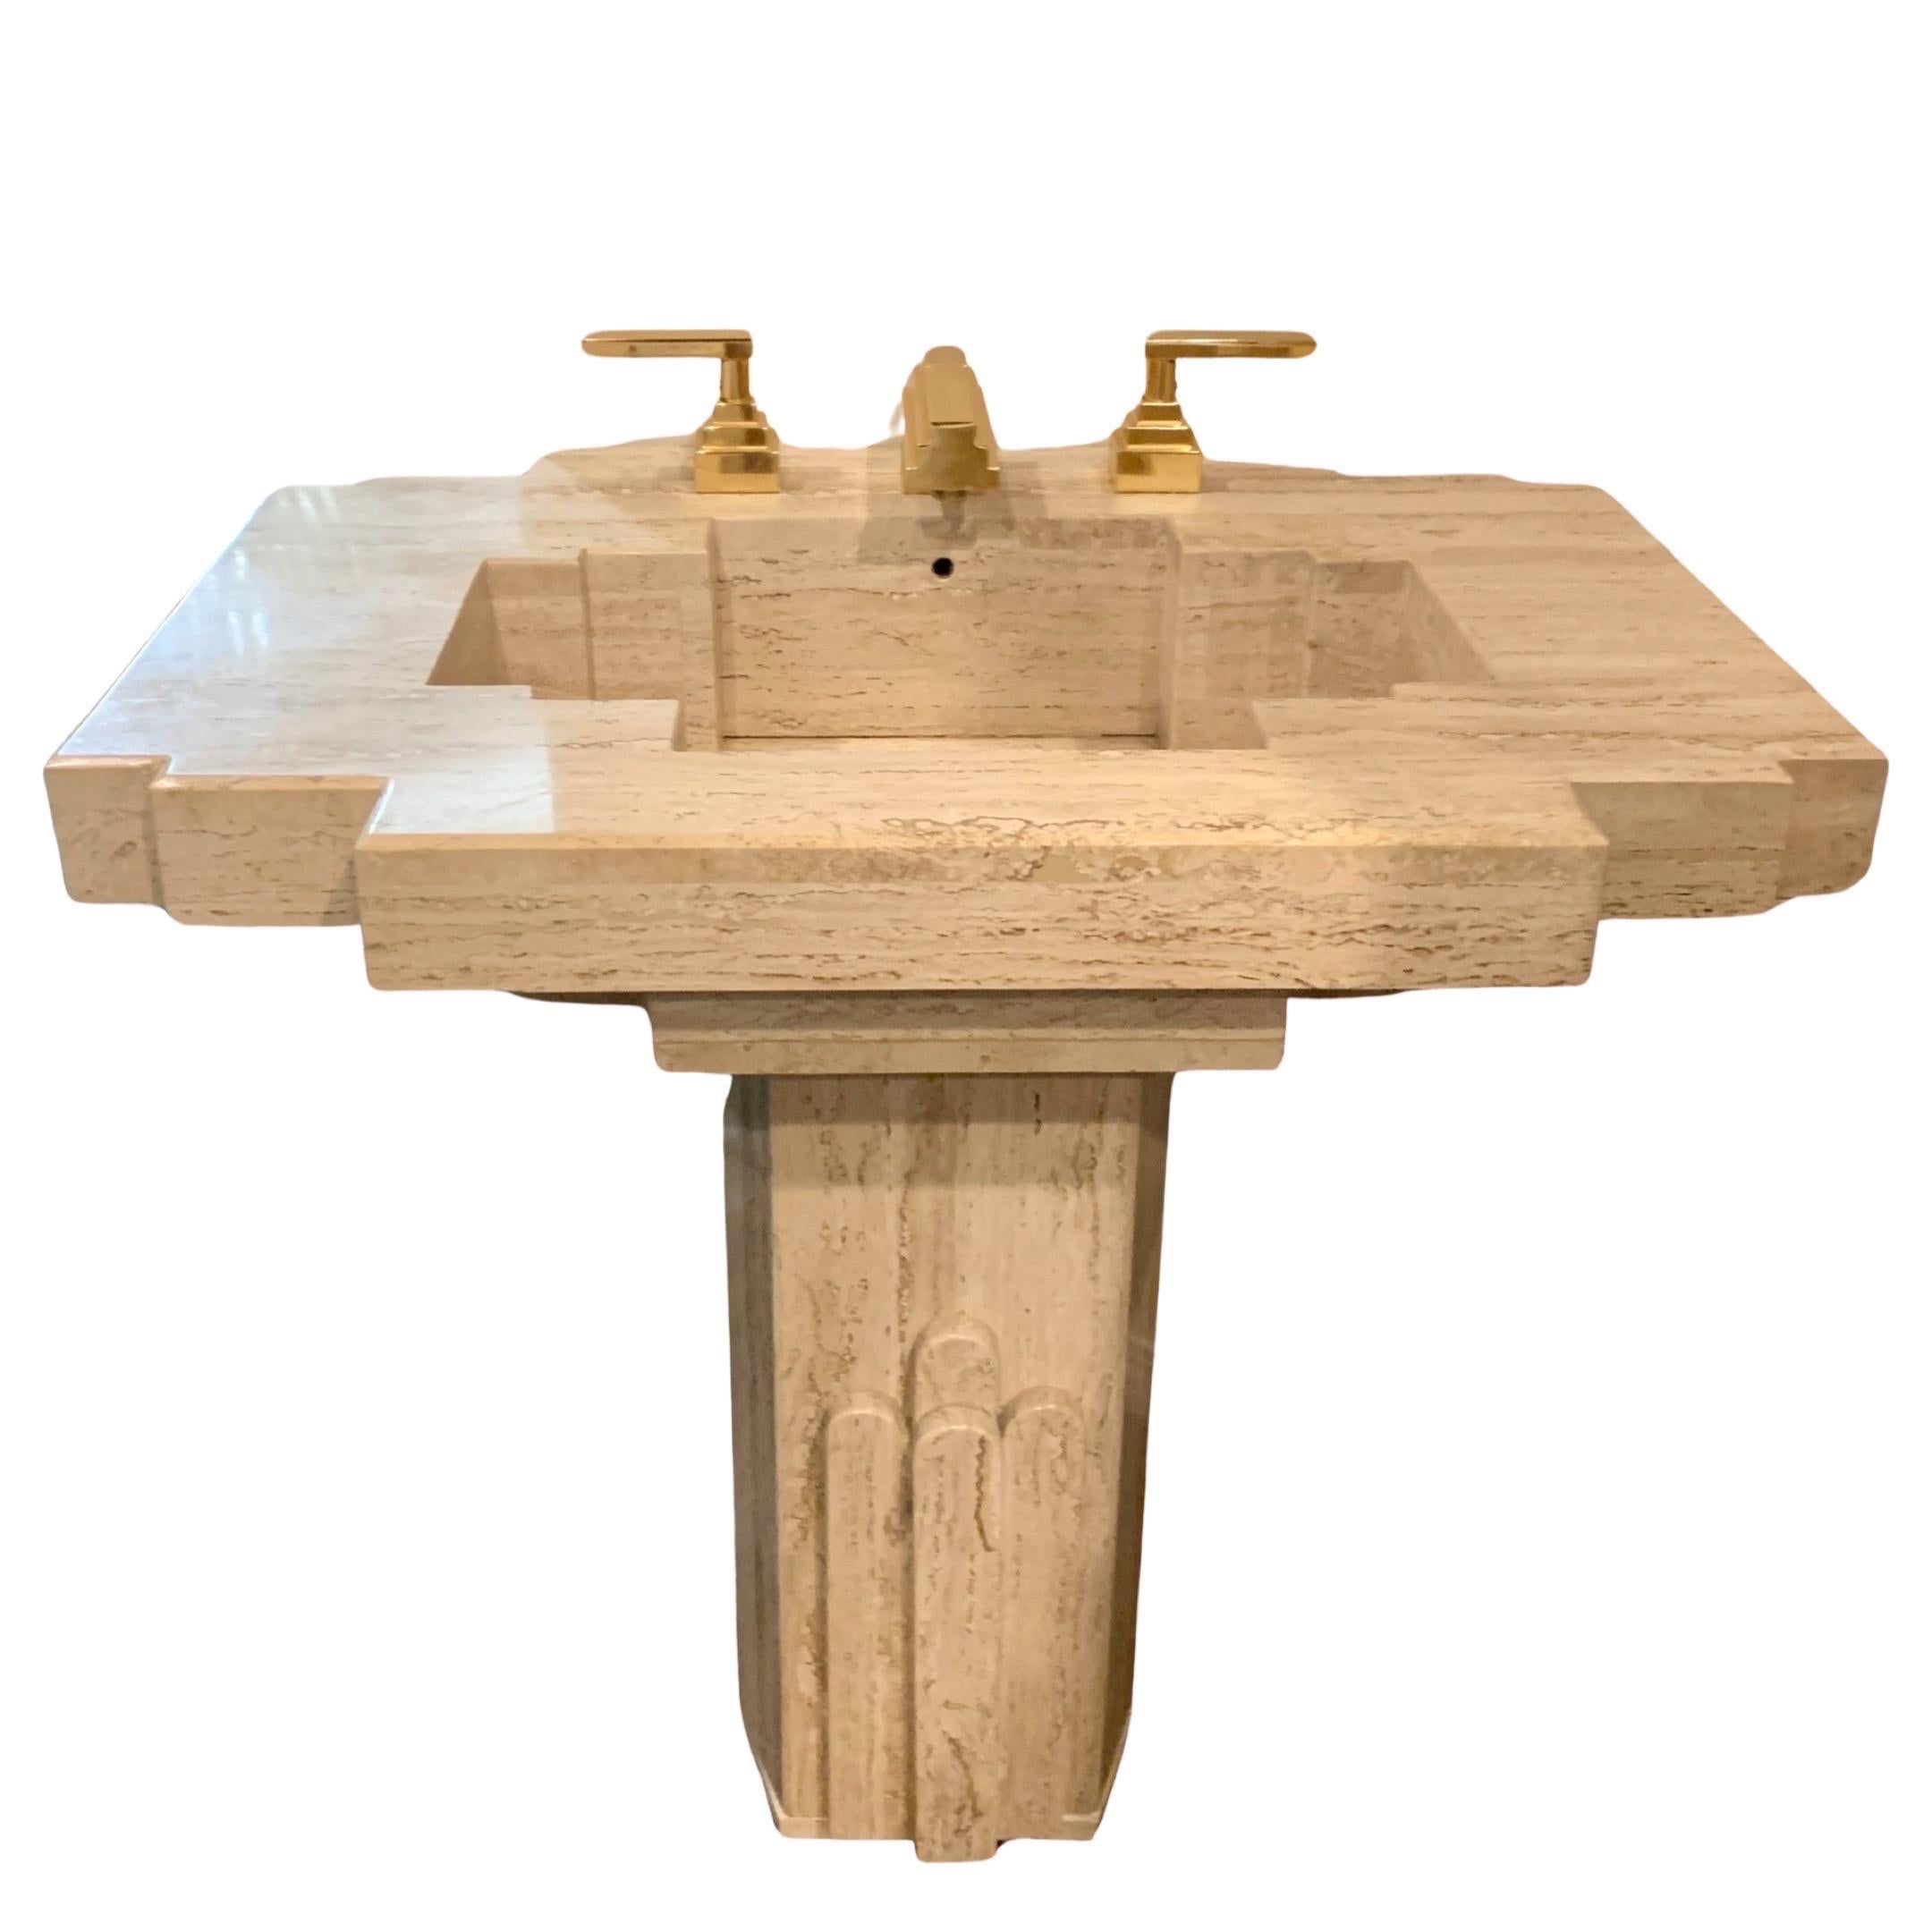 You can’t buy anything this chic and modern anymore. We purchased this amazing hand carved travetine modern sink and glamorous and chic 22kt gold plated faucet from it’s original estate in Indian Wells, Ca. Newly sold, the estate will be completely